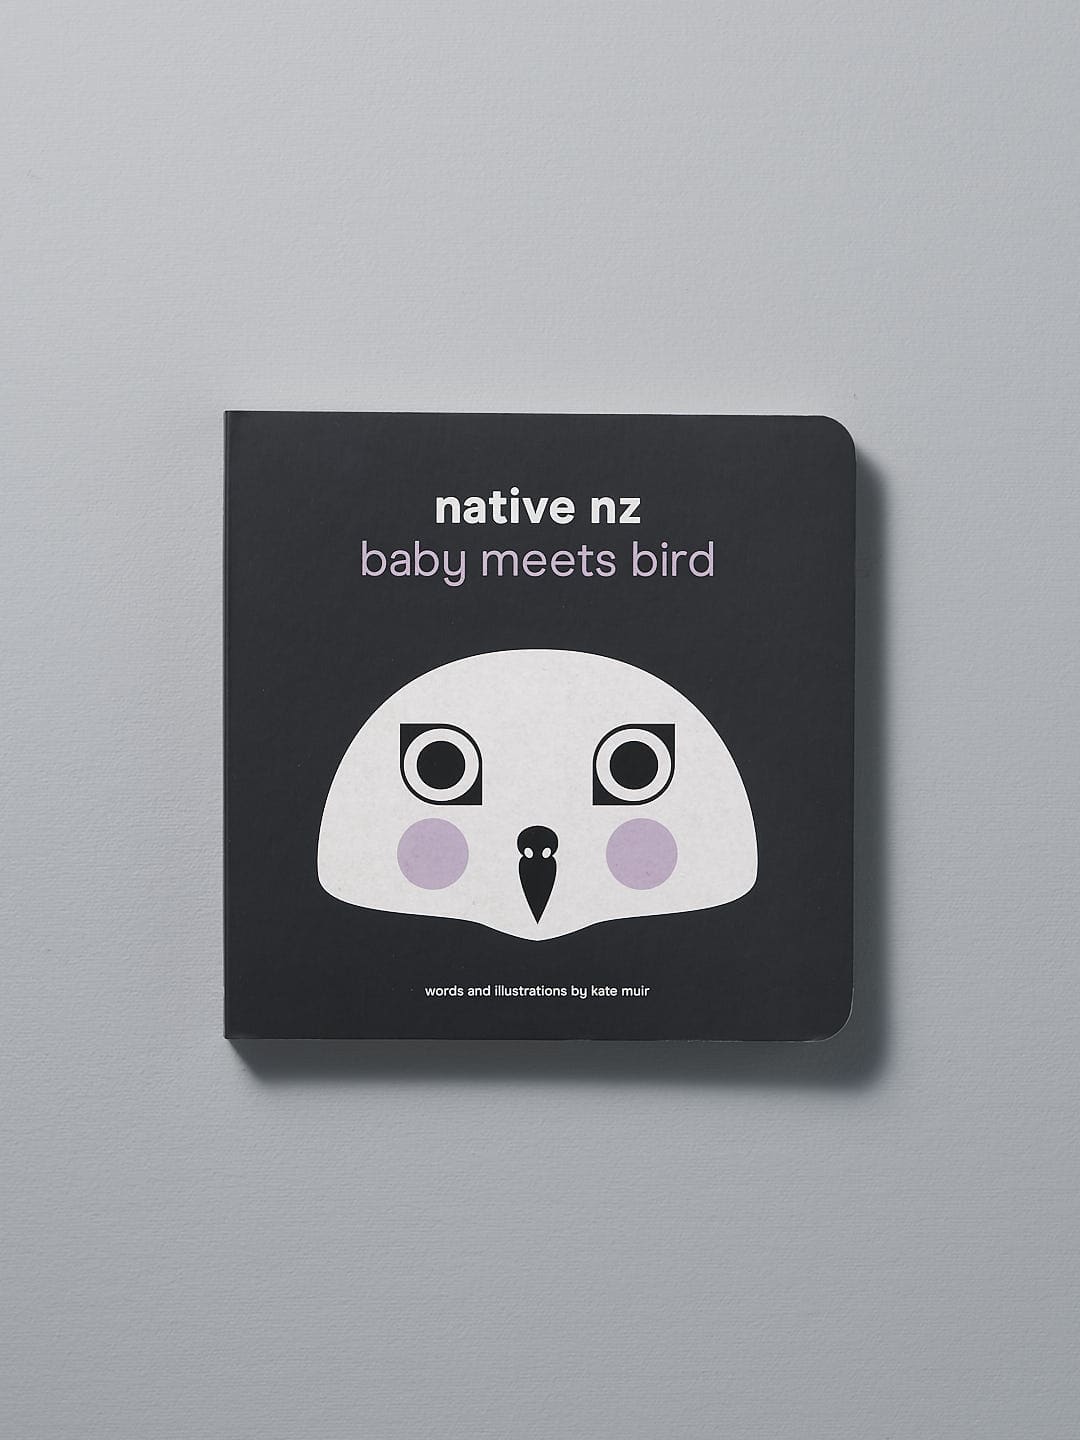 A board book titled "Native NZ Baby Meets Bird" with a simple New Zealand birds illustration on the cover by Kate Muir.